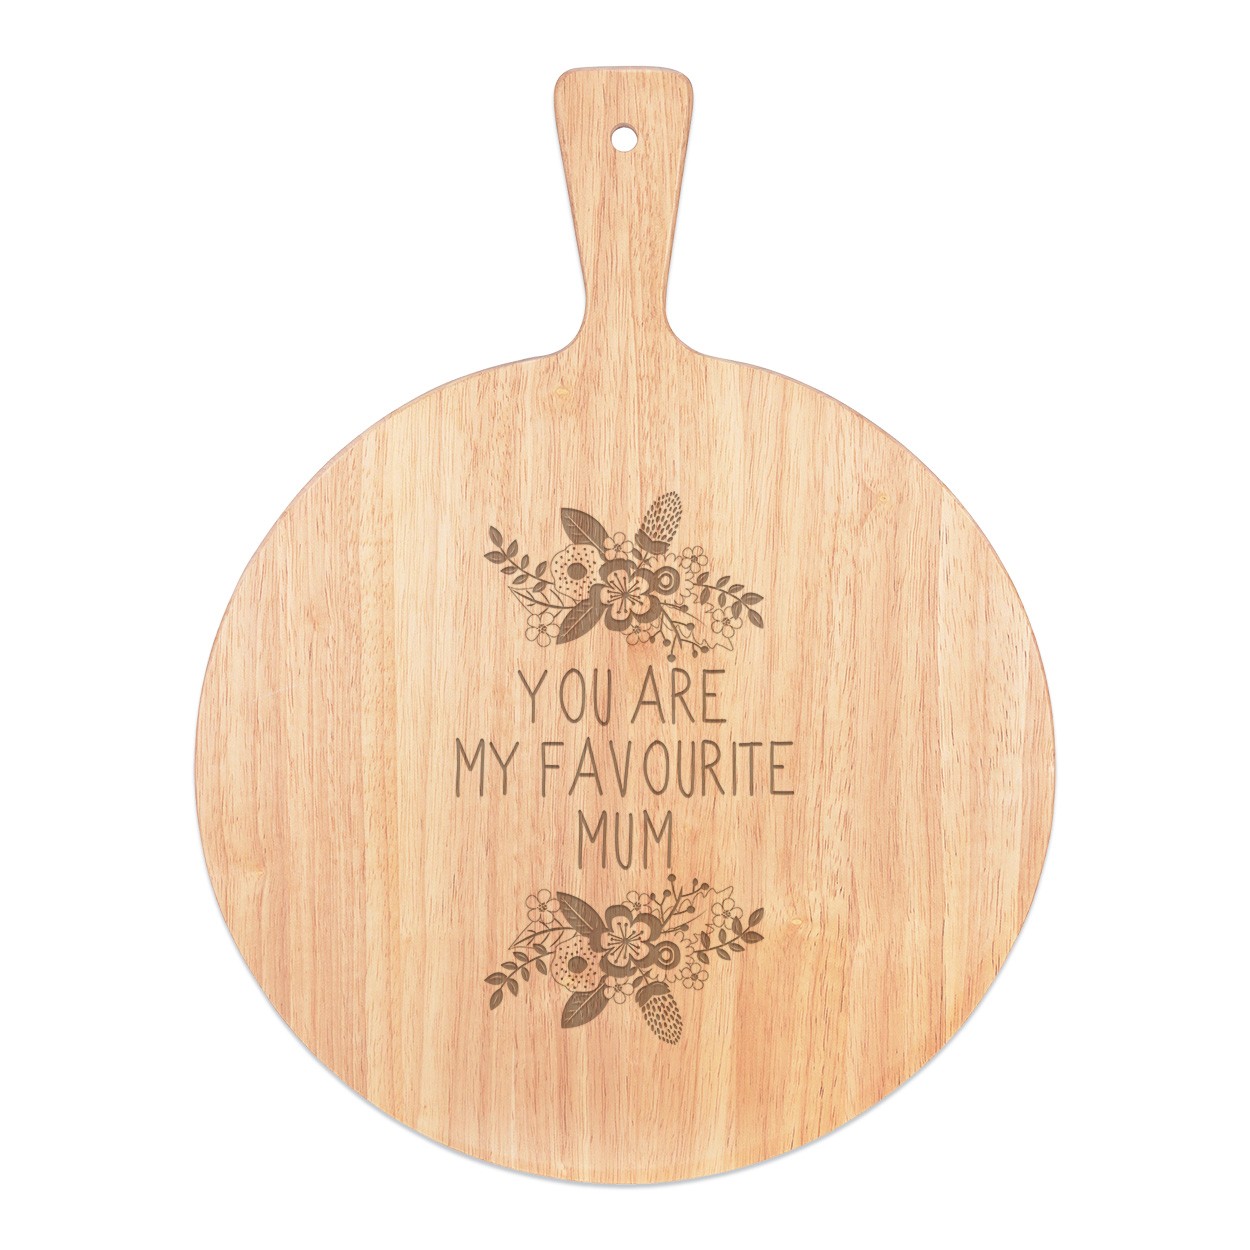 You Are My Favourite Mum Pizza Board Paddle Serving Tray Handle Round Wooden 45x34cm